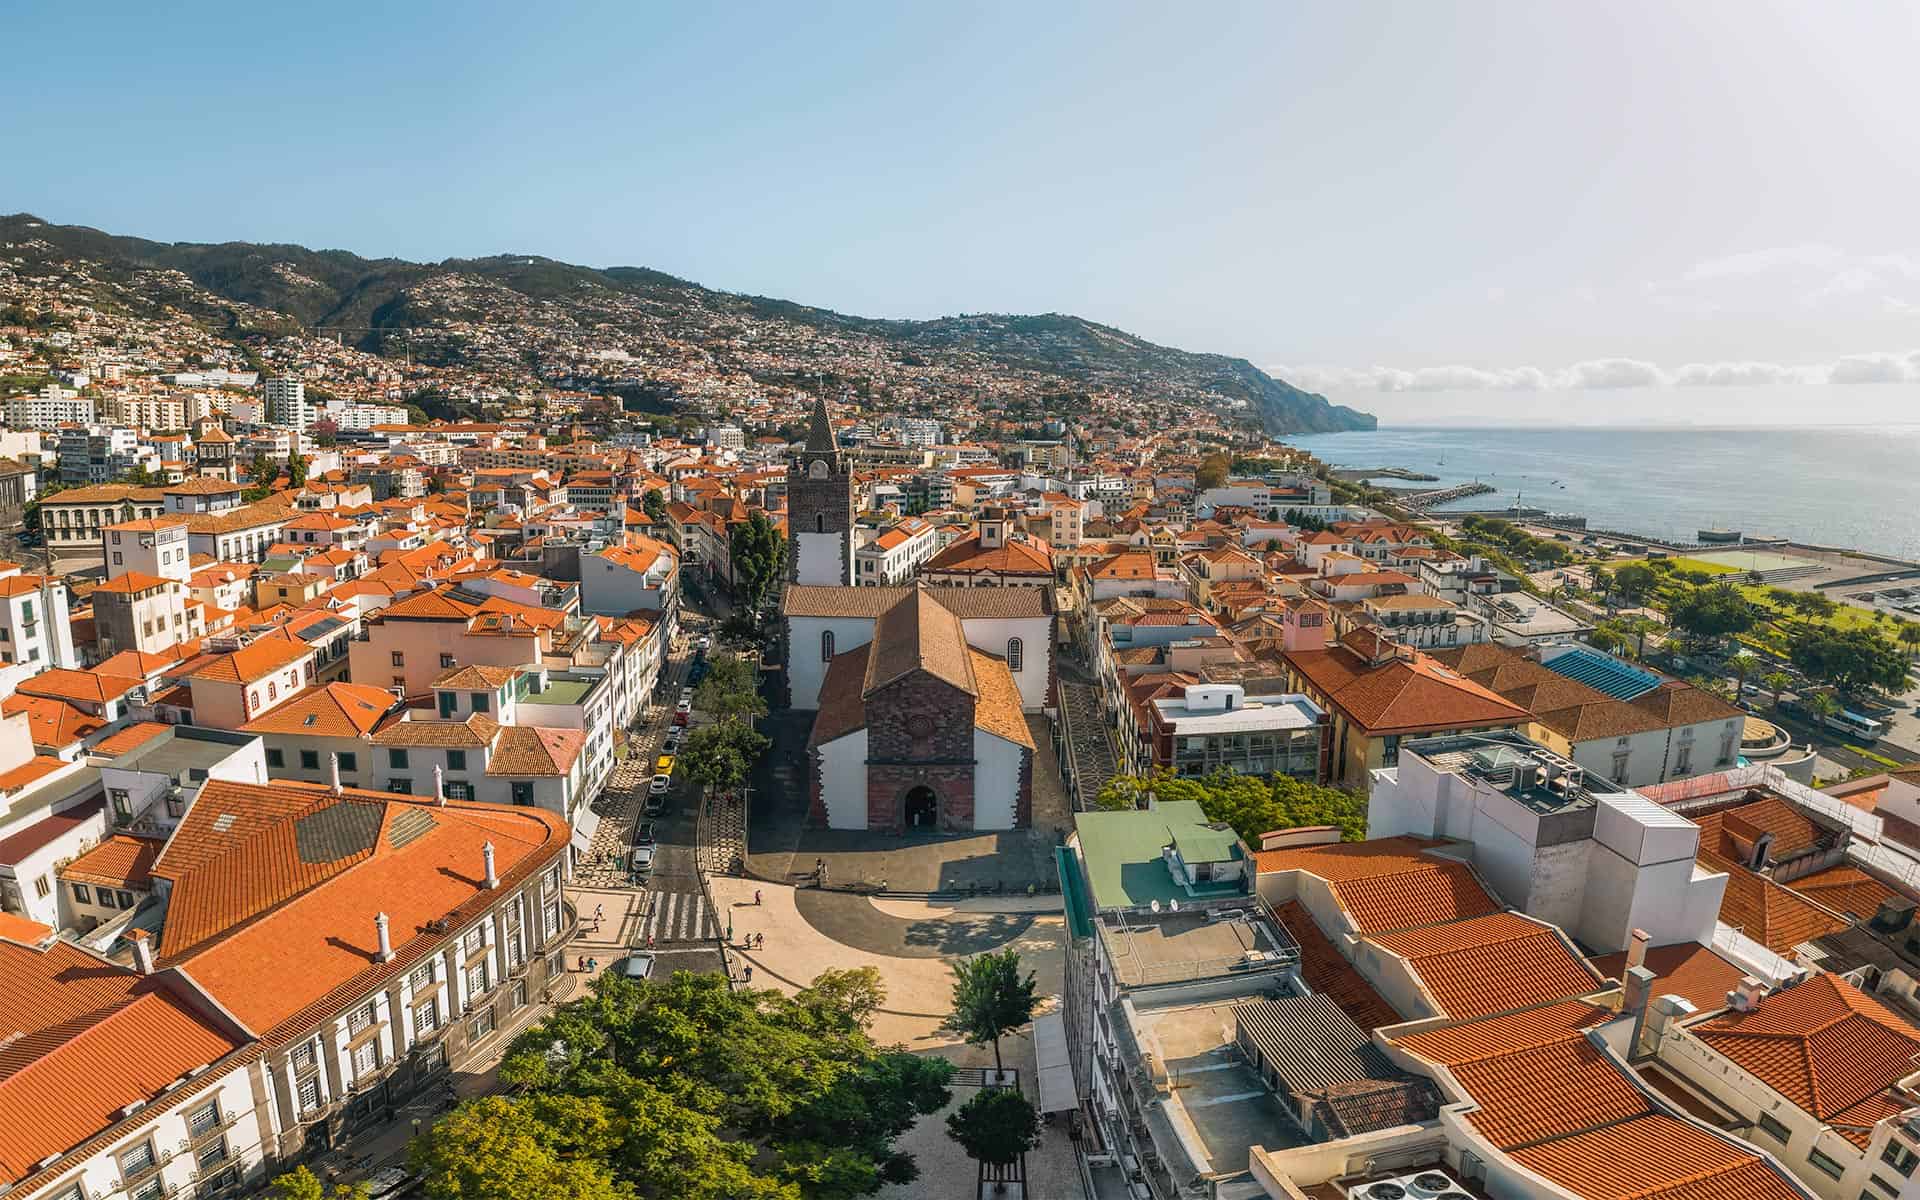 25+ BEST THINGS TO DO IN FUNCHAL, MADEIRA - The Ultimate Guide